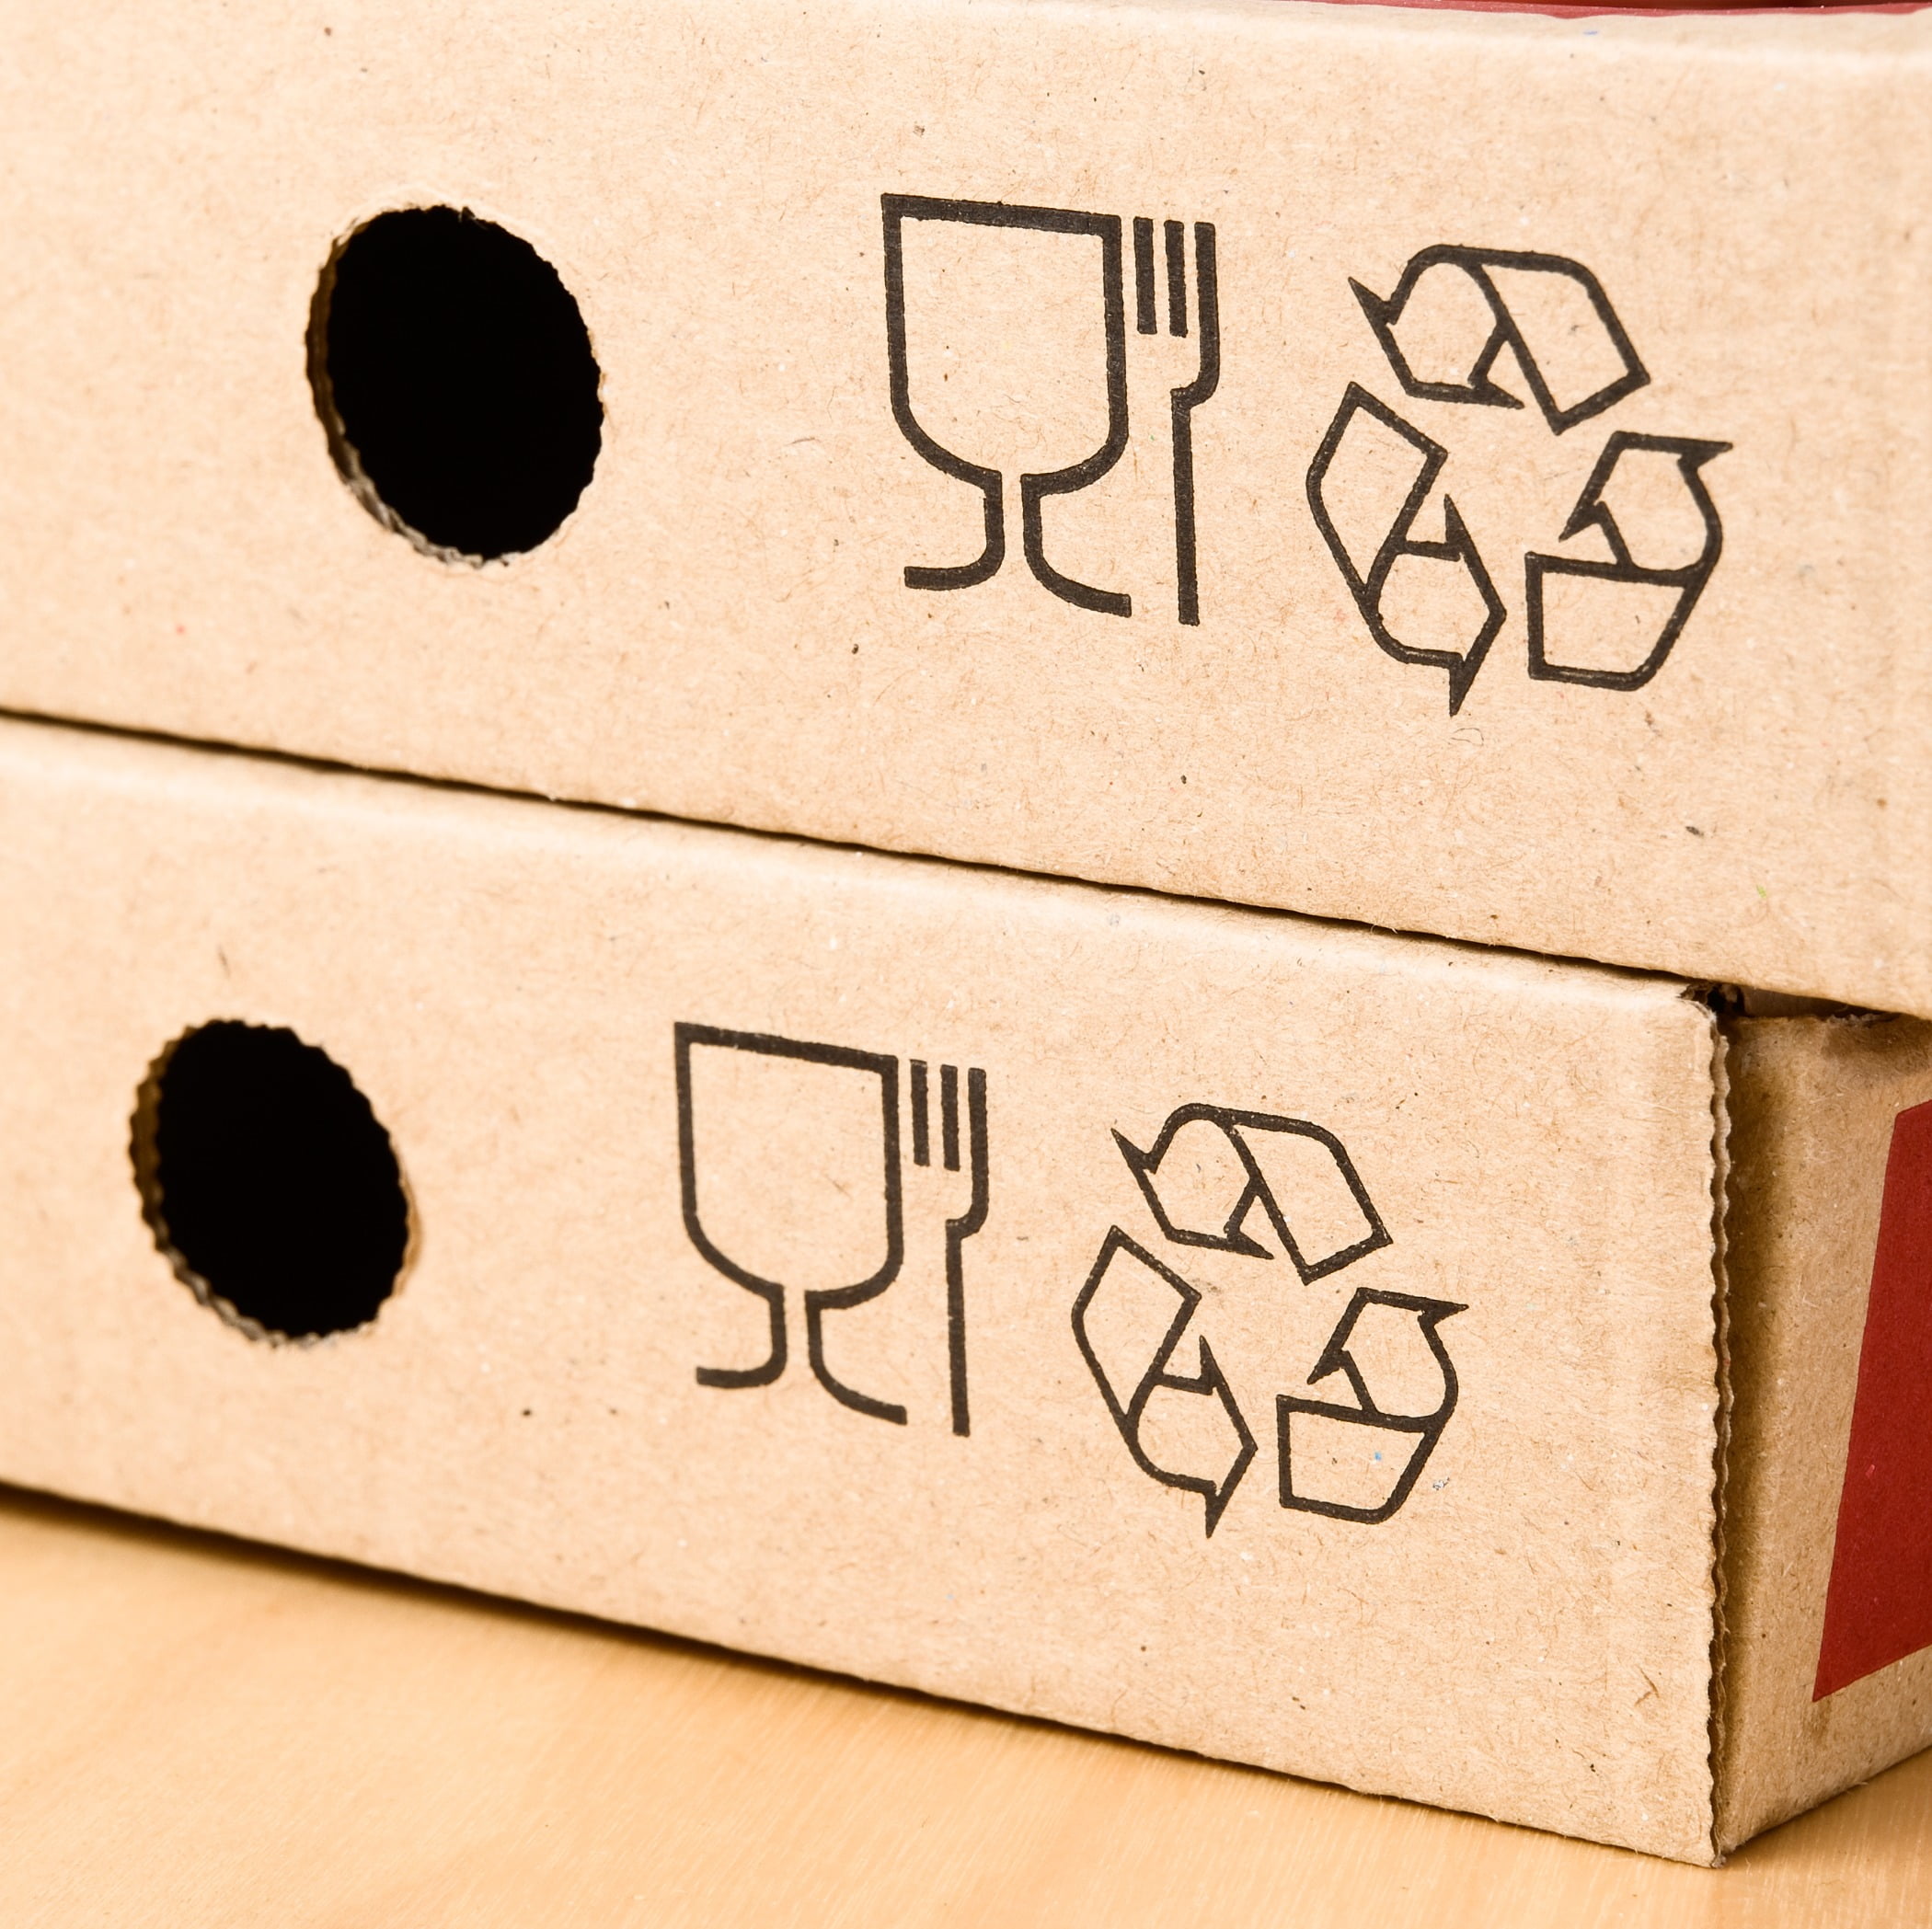 Pizza boxes with recycling logo